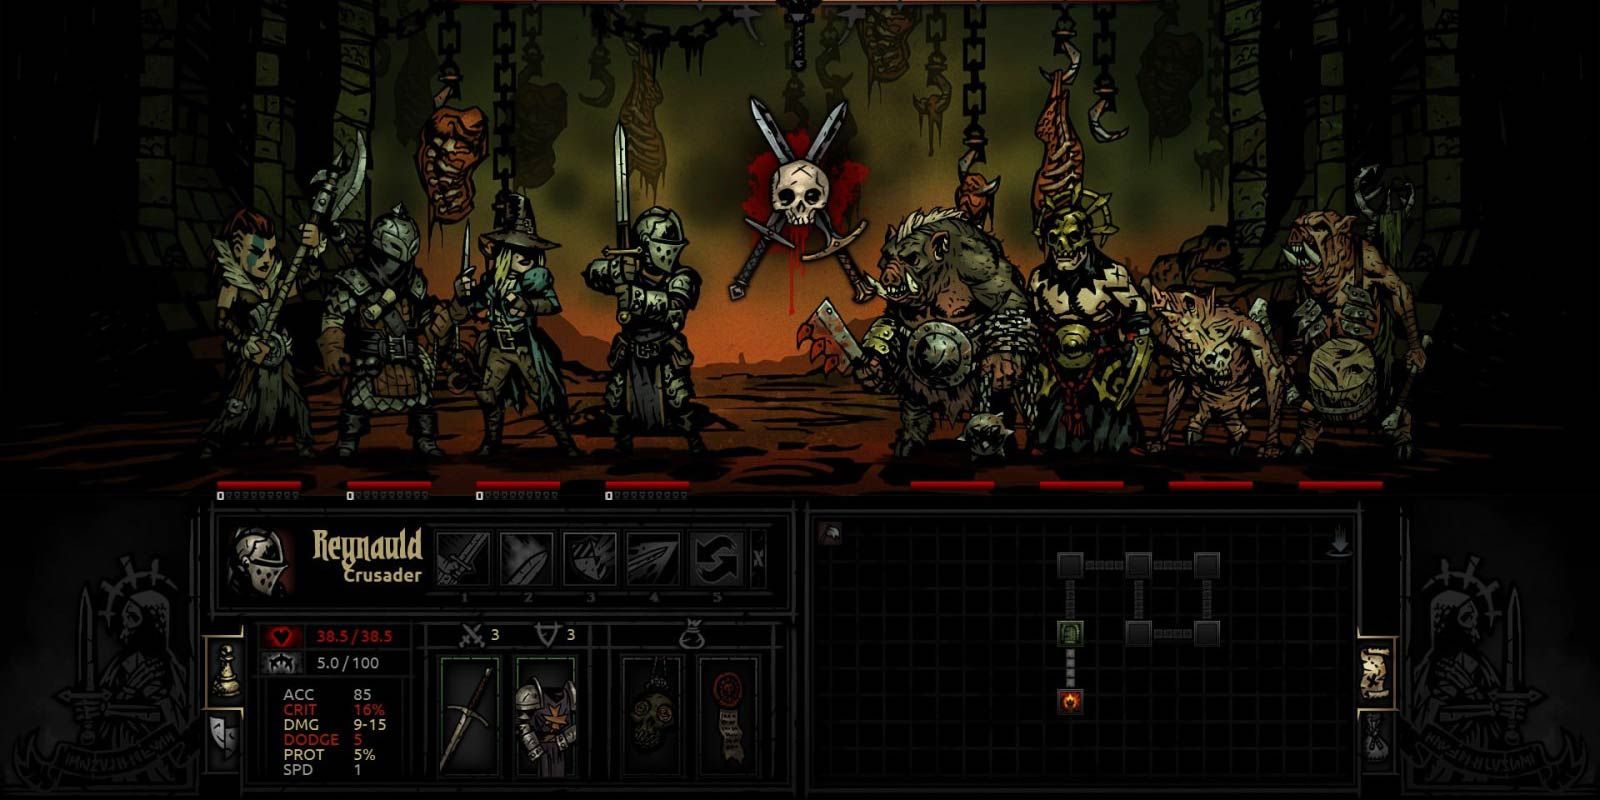 A group of adventurers facing off against swines and cultists in Darkest Dungeon.